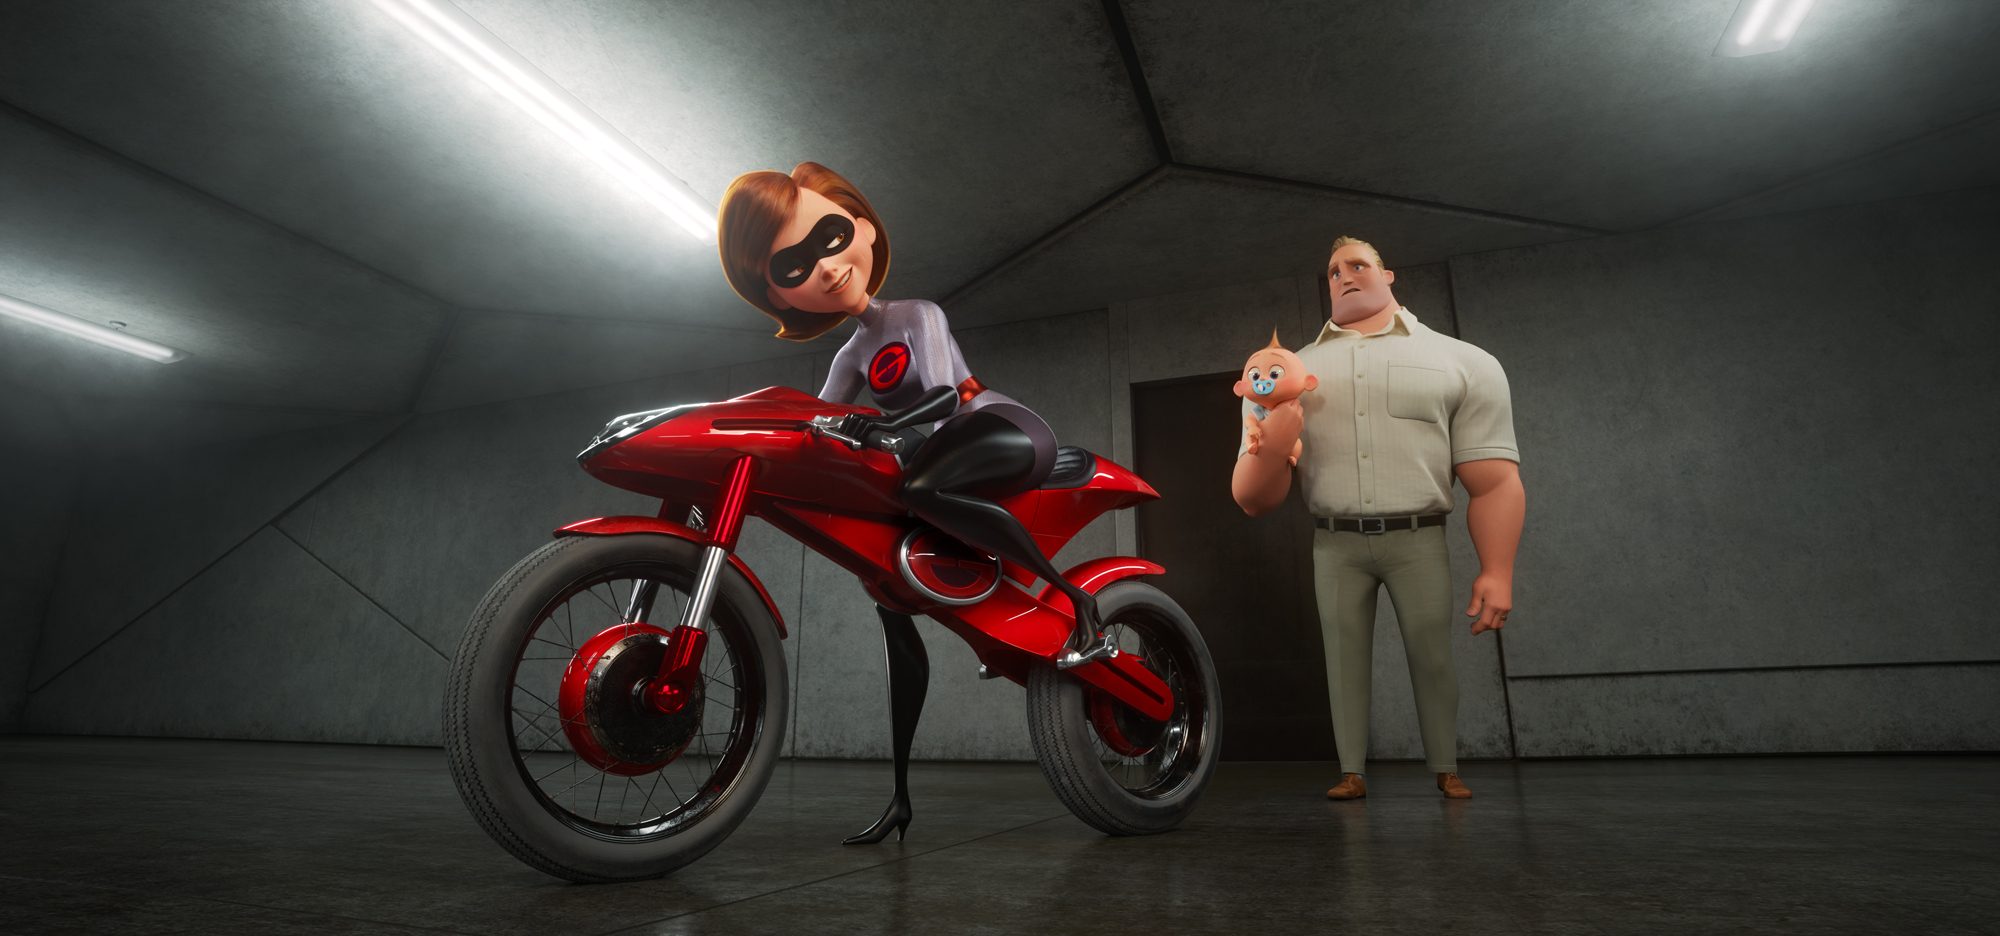 TAKING THE WHEEL. In 'Incredibles 2, Helen aka Elastigirl is called on to help bring Supers back. Her mission comes with a brand-new Elasticycle, a state-of-the-art cycle that is designed just for her.   